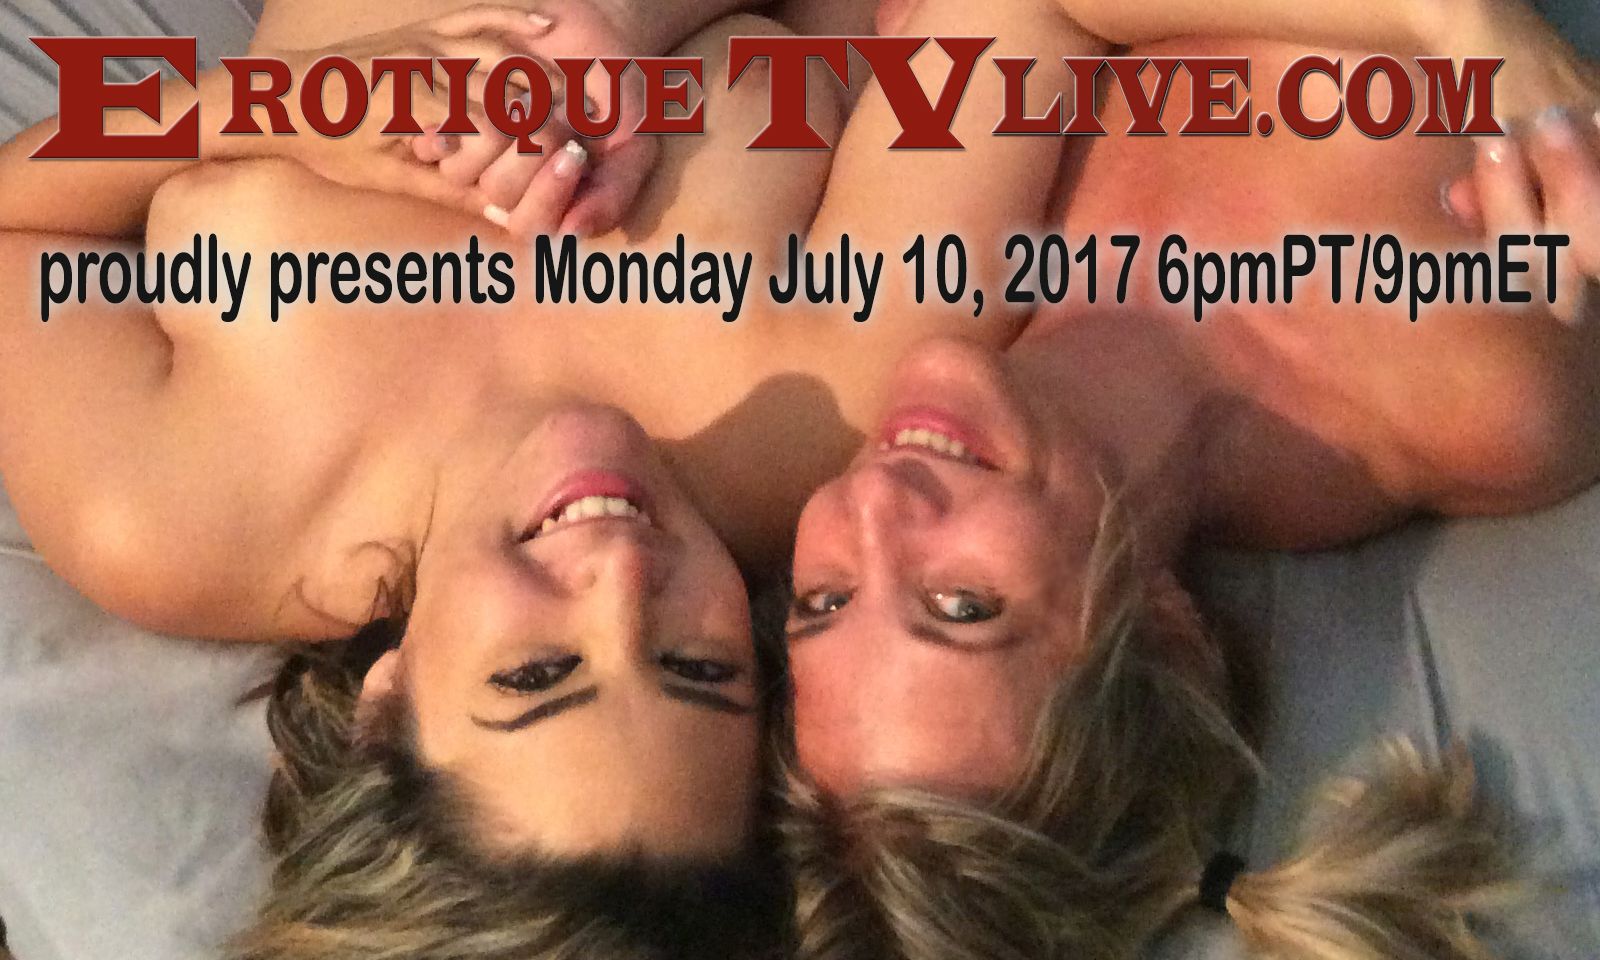 Alix Lovell, Sky Haven Featured Tonight in Erotique Live Show